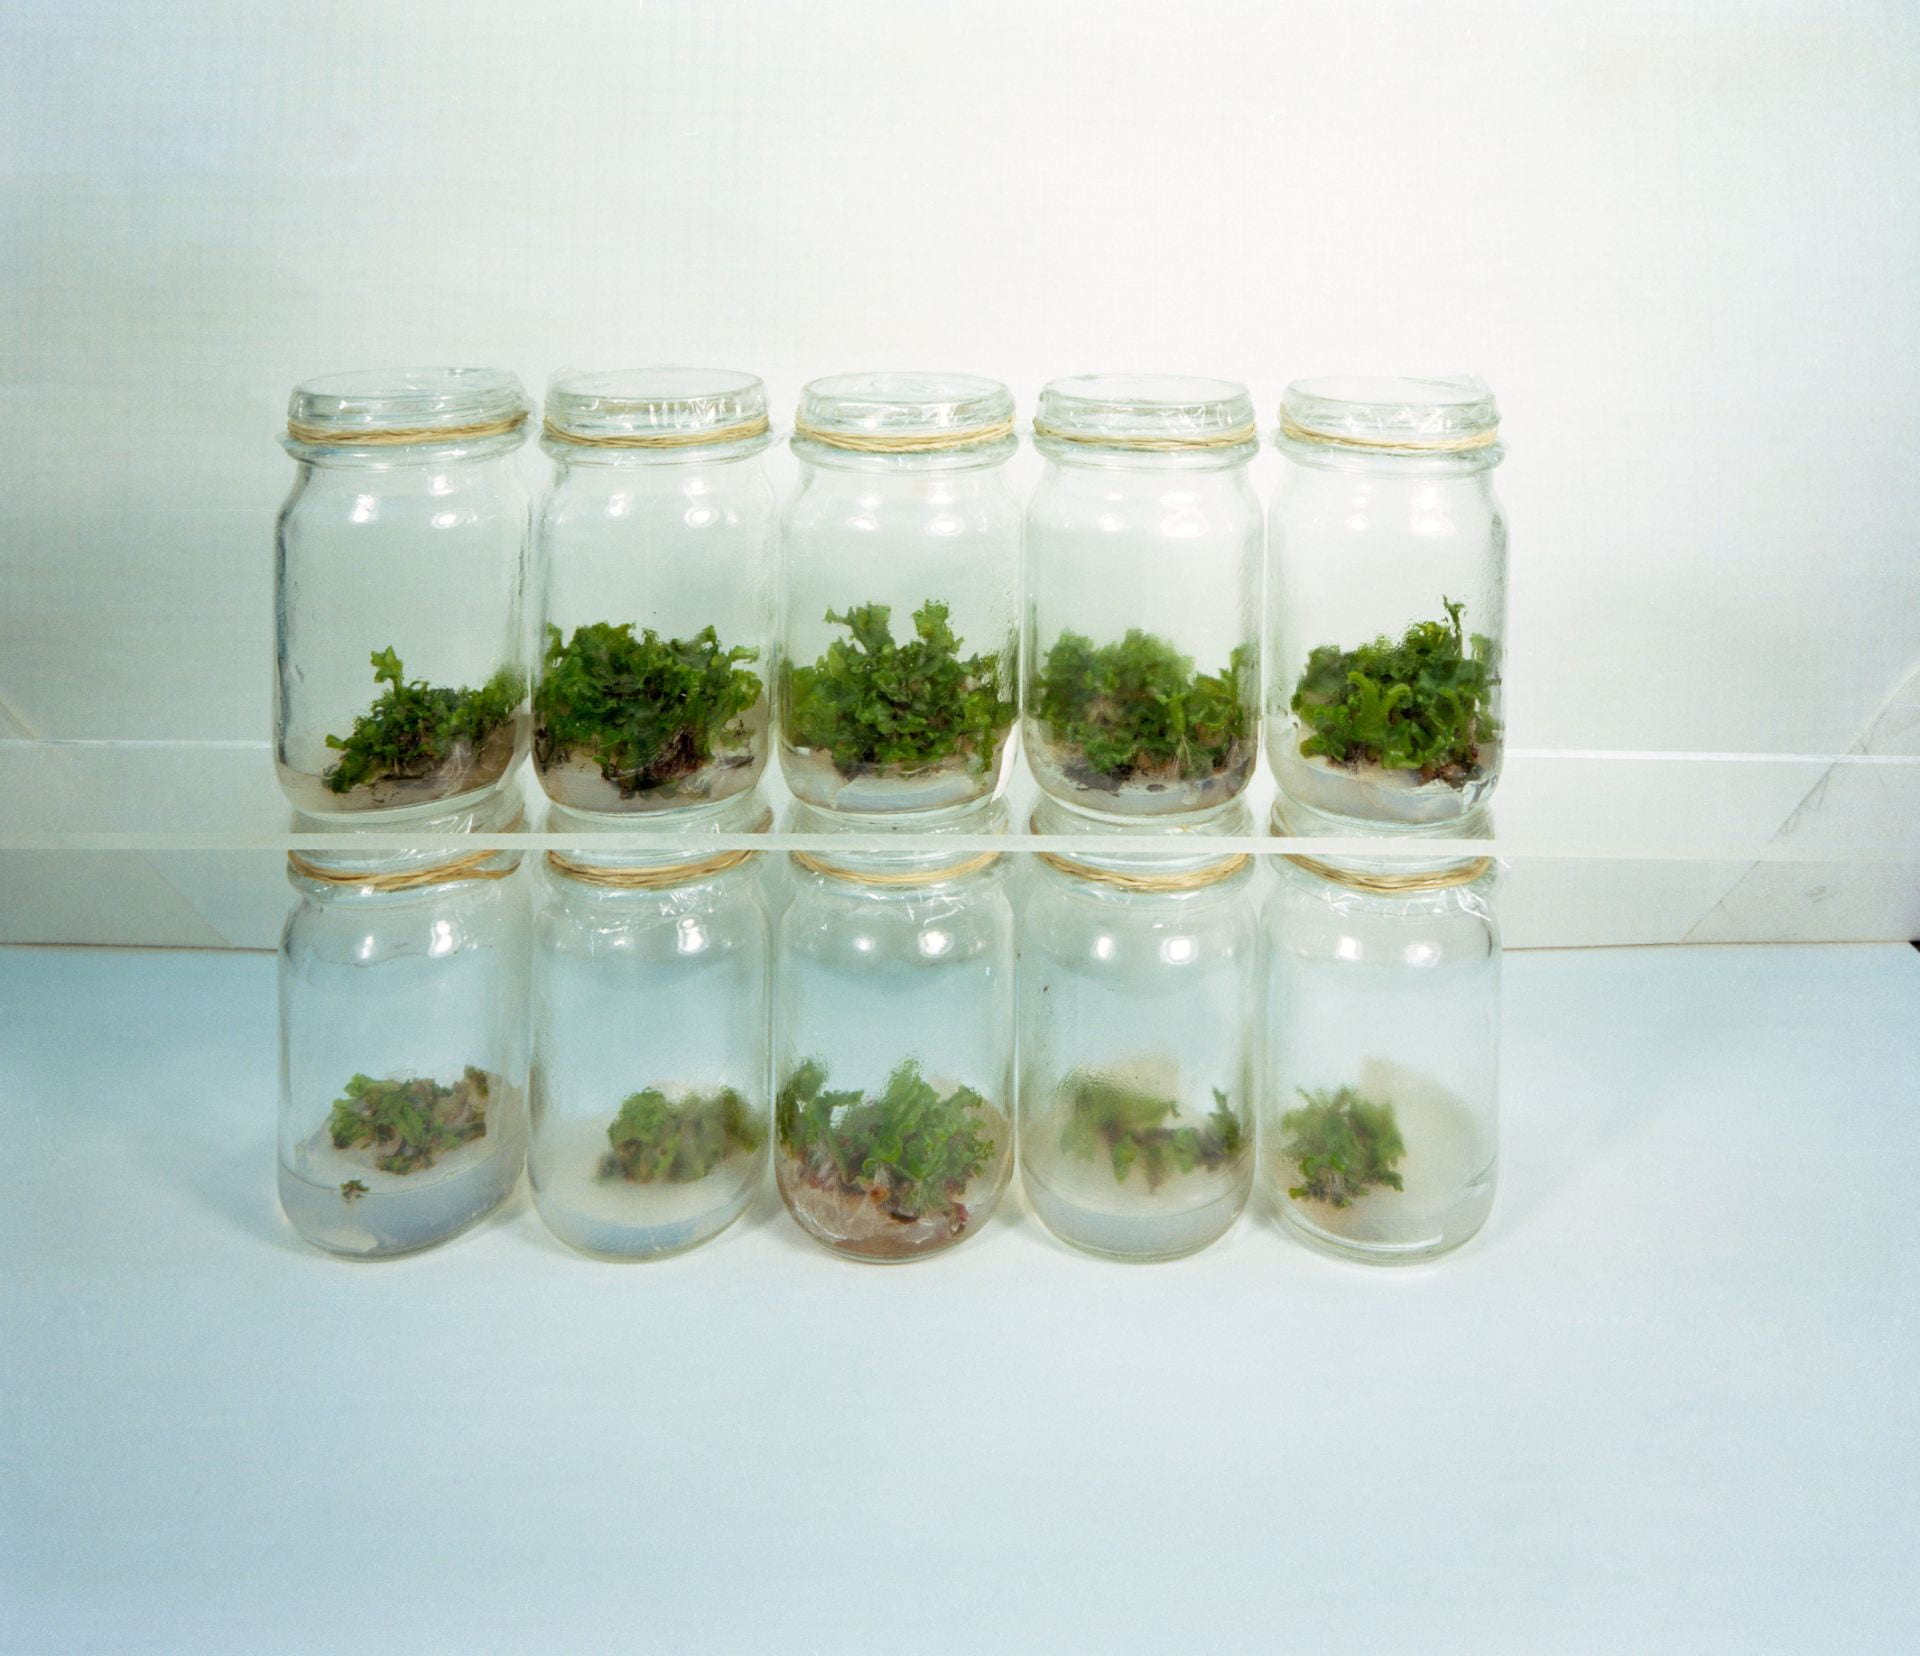 Two rows of jars with small plants growing in them. The top row has more developed growth. 